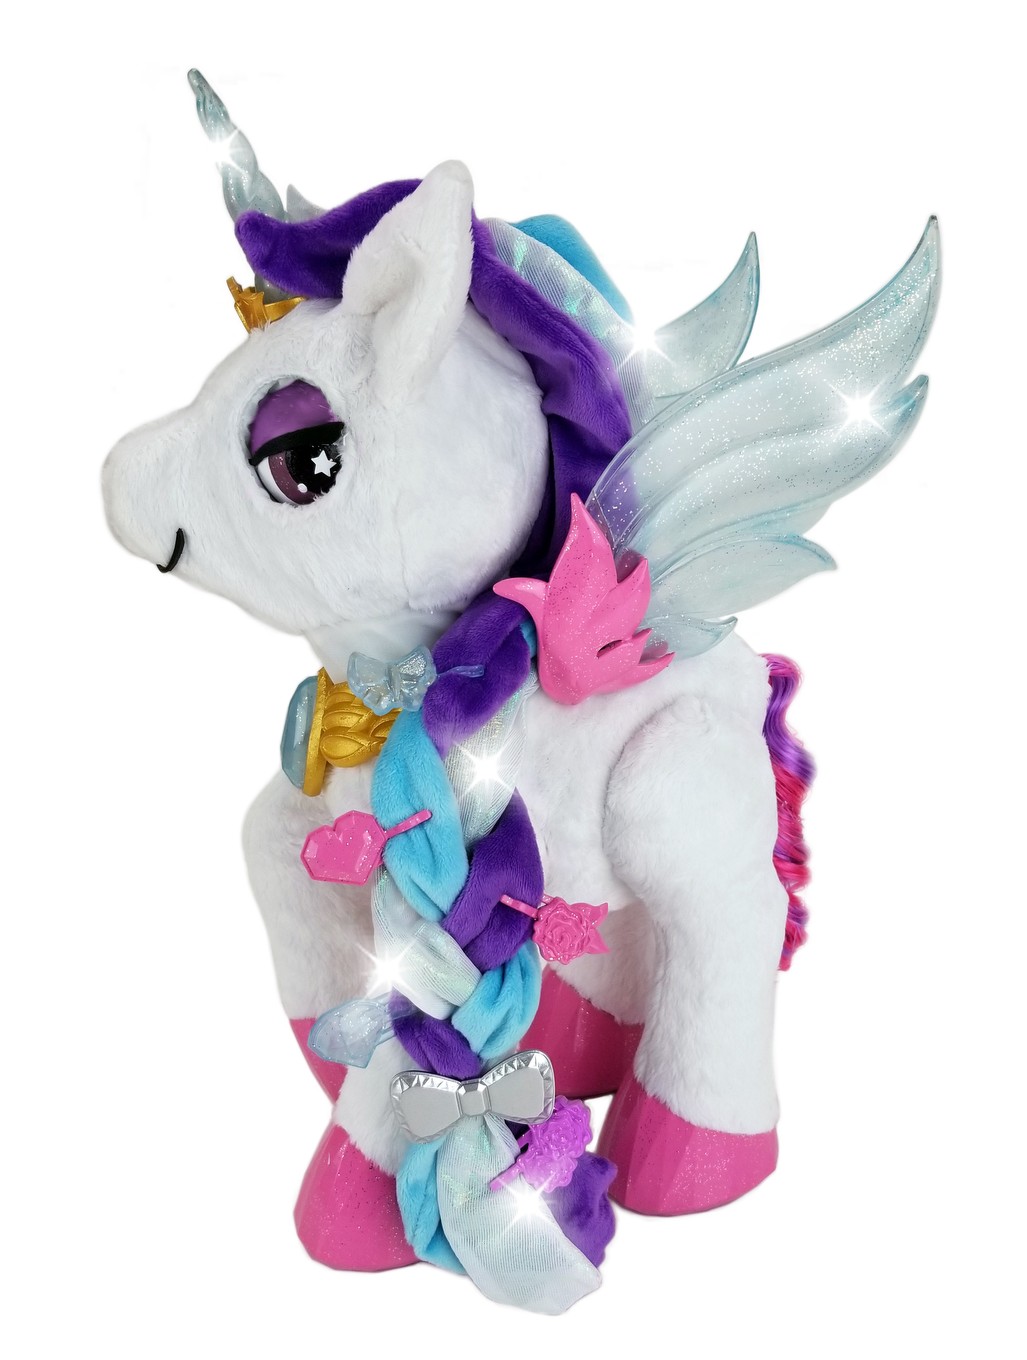 VTech Myla The Magical Make-up Unicorn Soft Toy With Microphone for Kids for sale online 